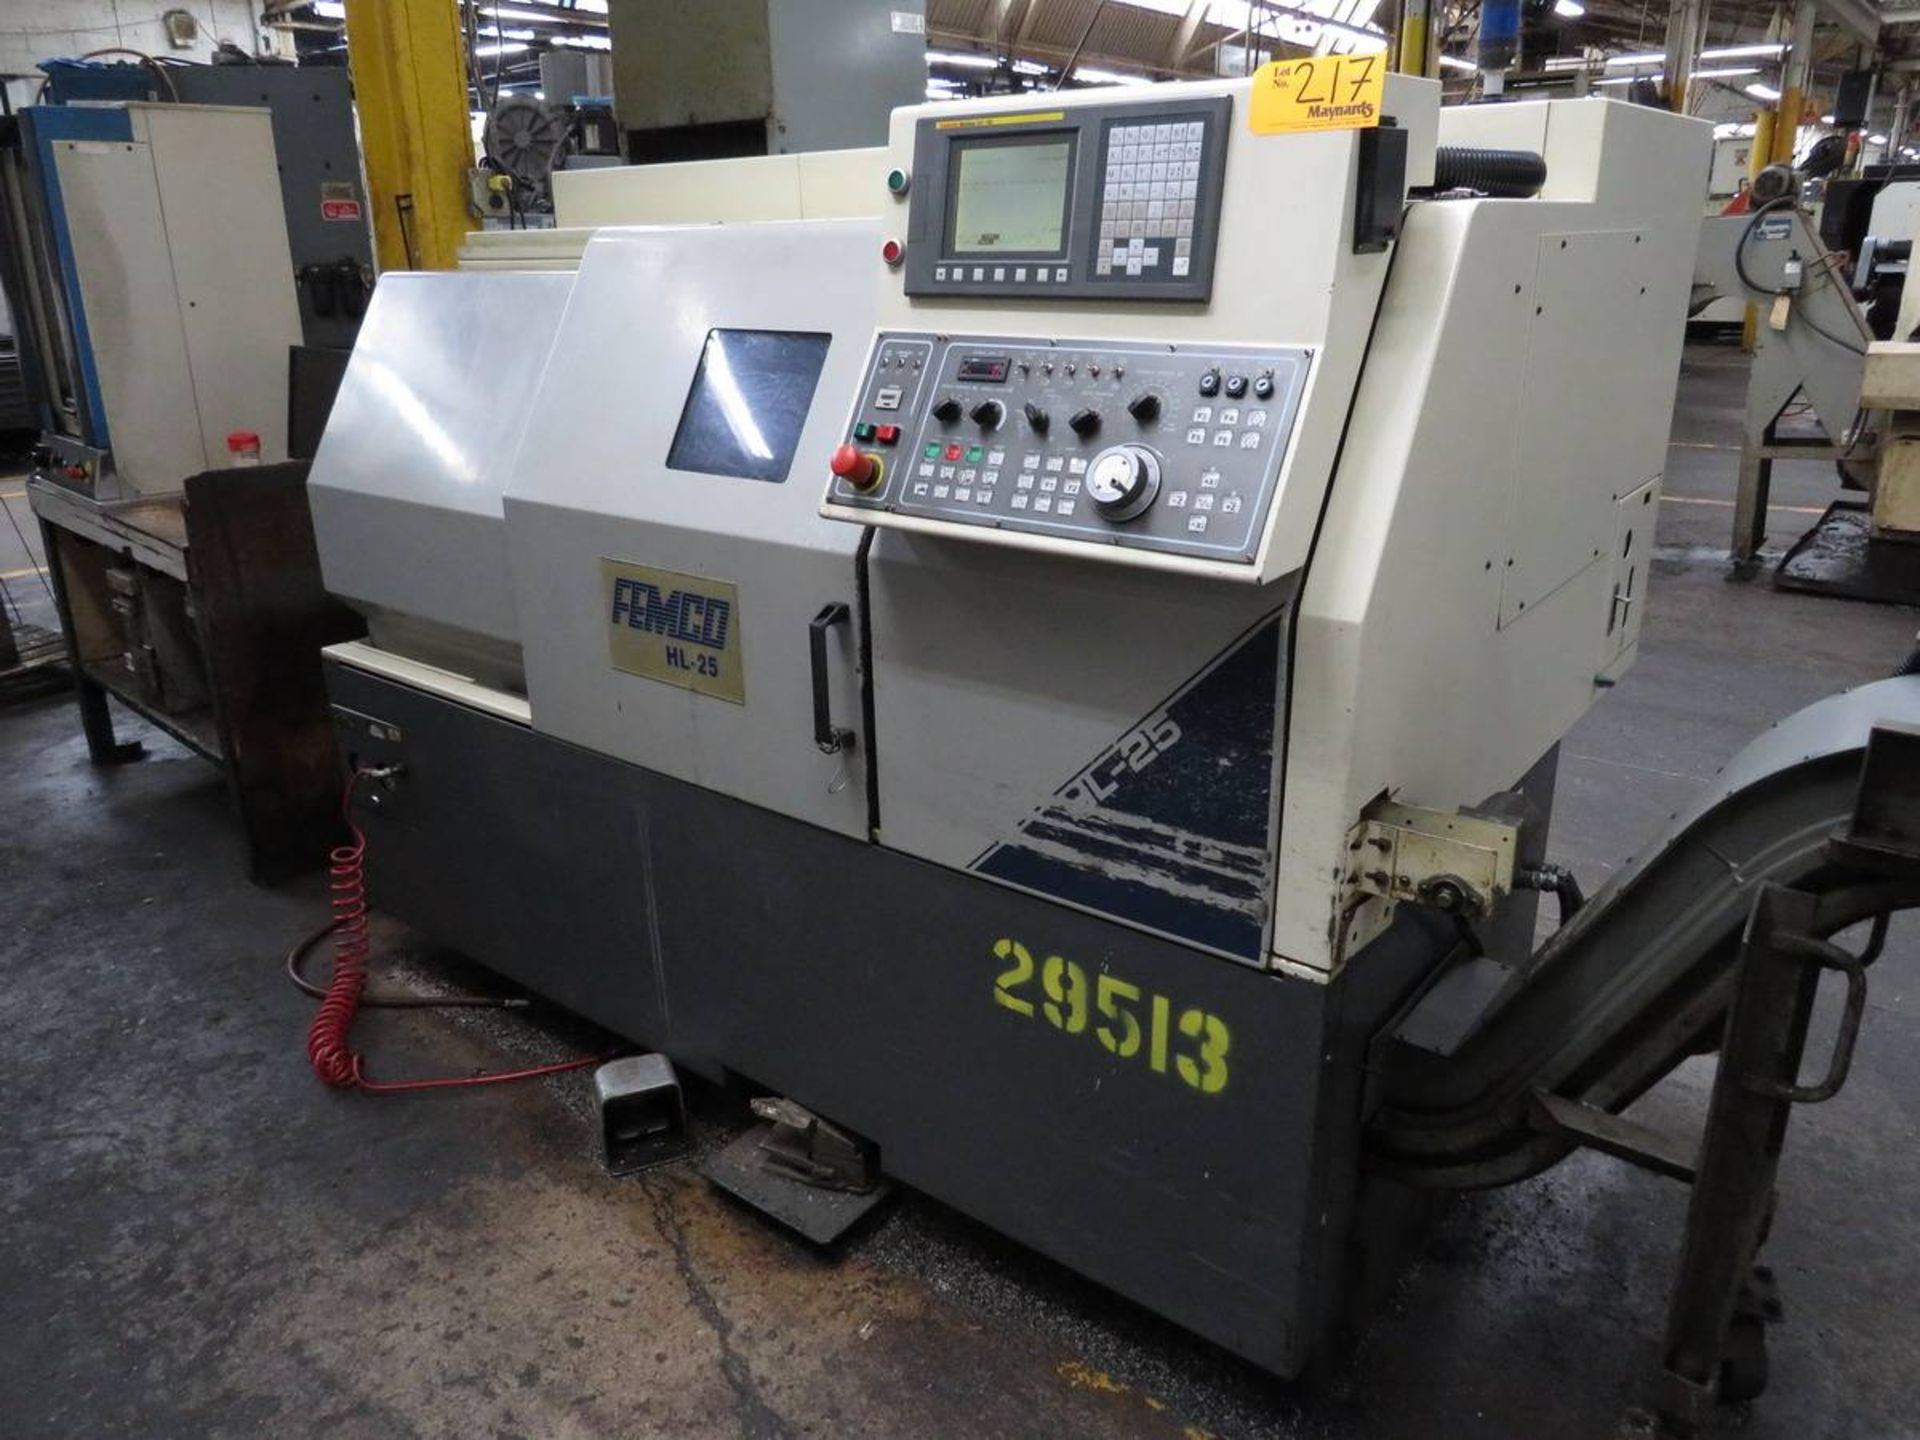 2007 Femco HL-25 2 Axis Dual Spindle CNC Turning Center - Image 4 of 9